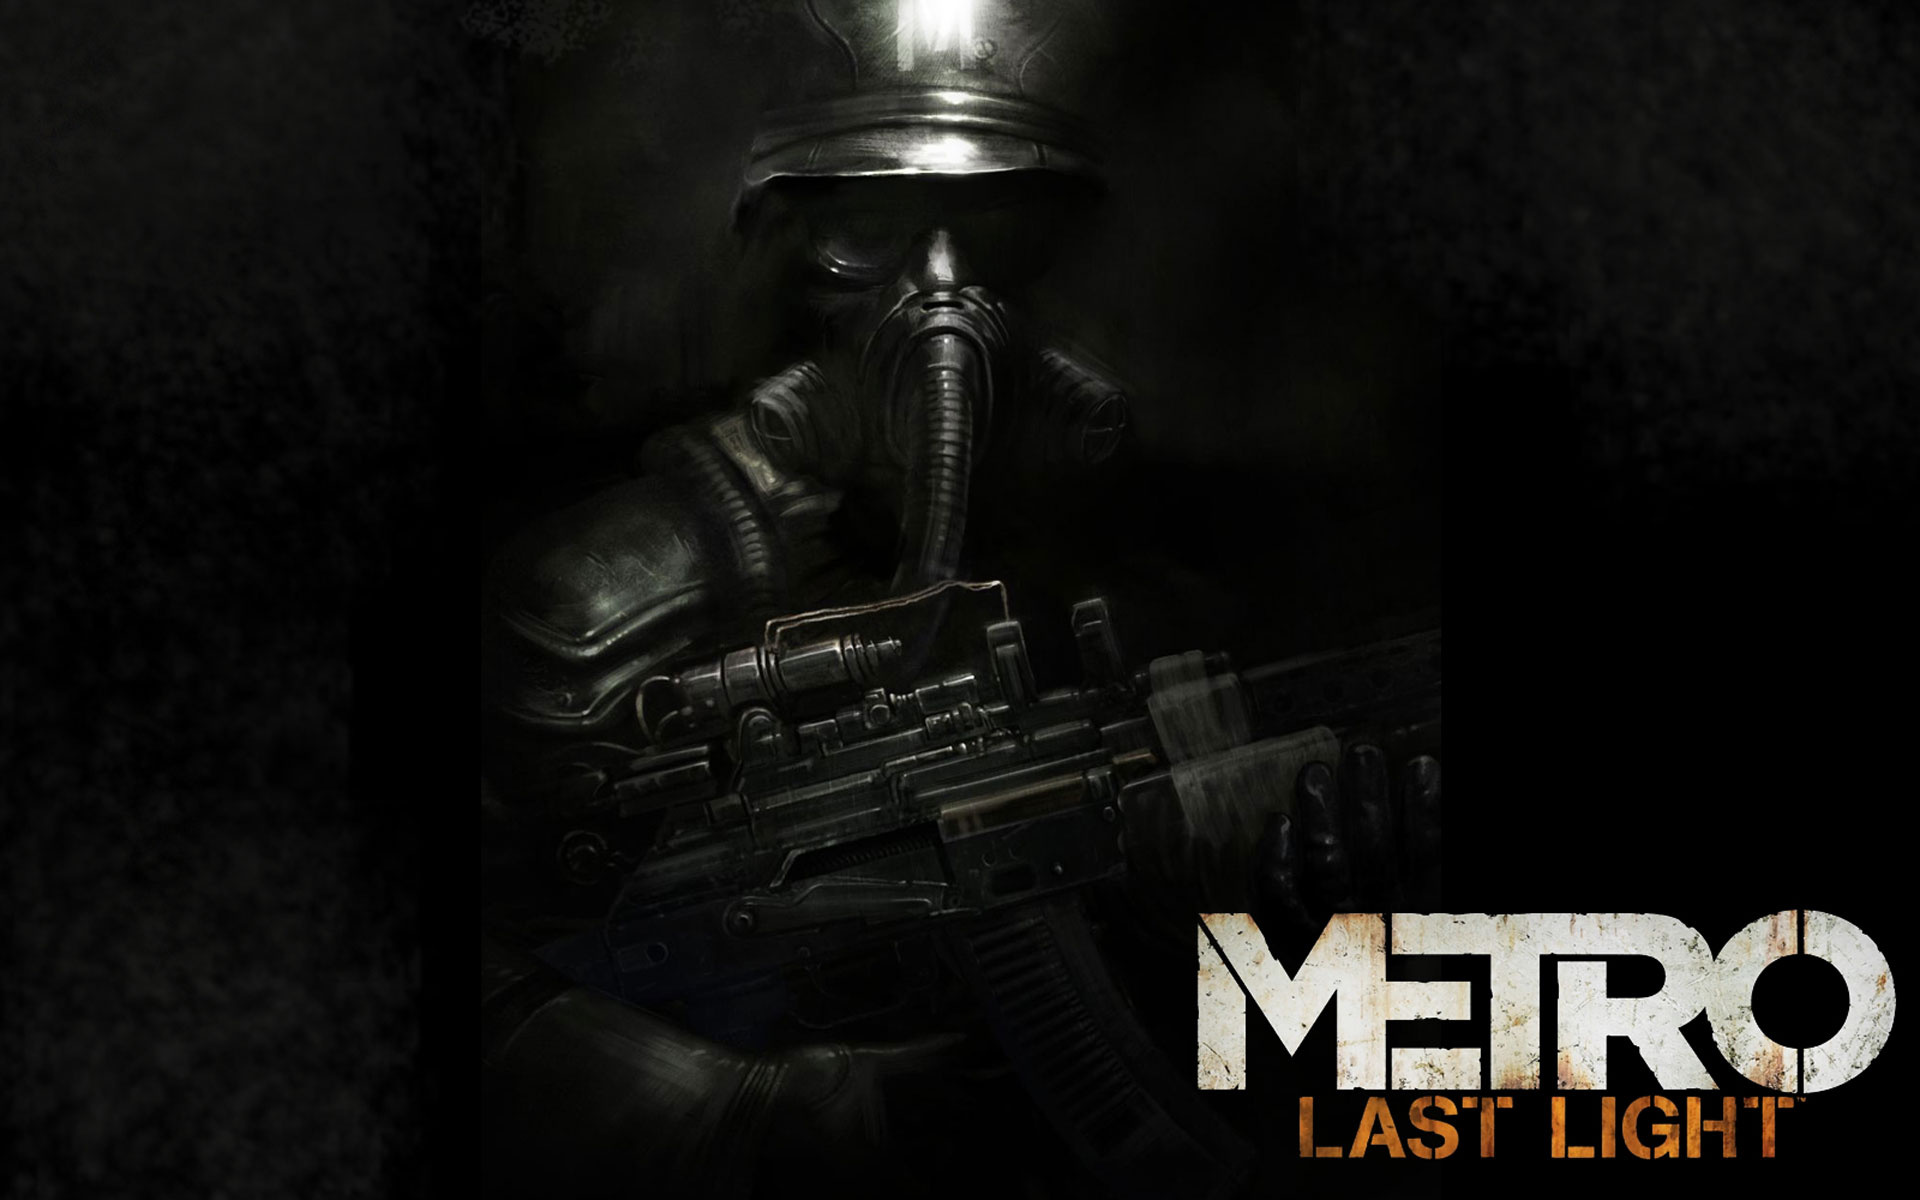 Metro Last Light, HD wallpapers, Background collection, Gaming, 1920x1200 HD Desktop